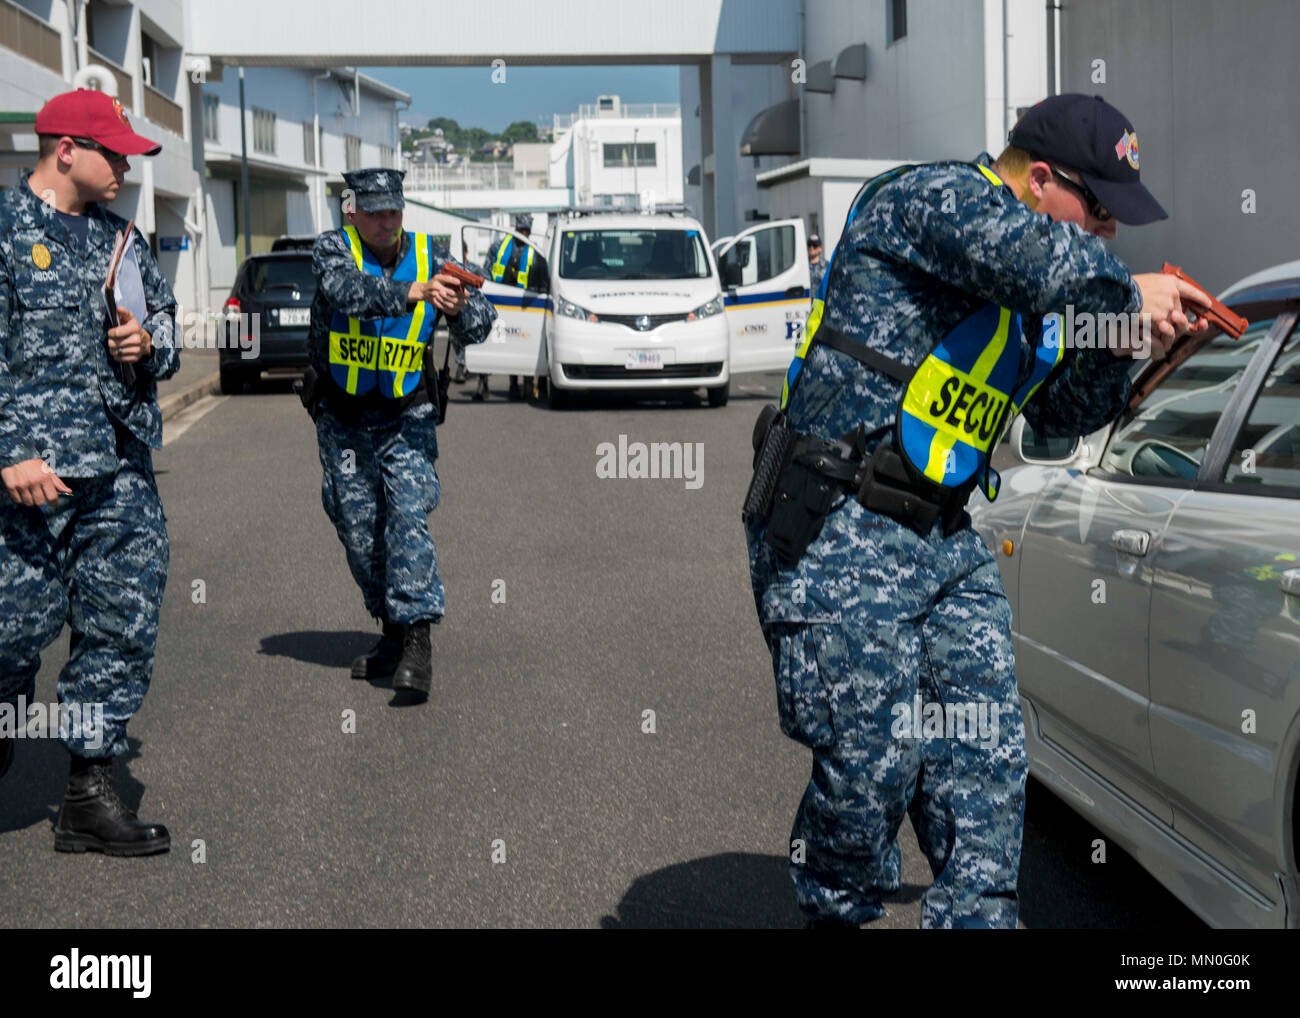 https://c8.alamy.com/comp/MN0G0K/170802-n-sd711-0079-sasebo-japan-aug-2-2017-us-fleet-activities-sasebo-security-forces-approach-a-vehicle-during-a-simulated-vehicle-gate-breach-during-exercise-citadel-pacific-2017-the-annual-exercise-designed-to-enhance-the-training-readiness-and-capability-of-navy-security-forces-to-respond-to-threats-to-navy-installations-and-units-us-navy-photo-by-mass-communication-specialist-3rd-class-geoffrey-p-barhamreleased-MN0G0K.jpg